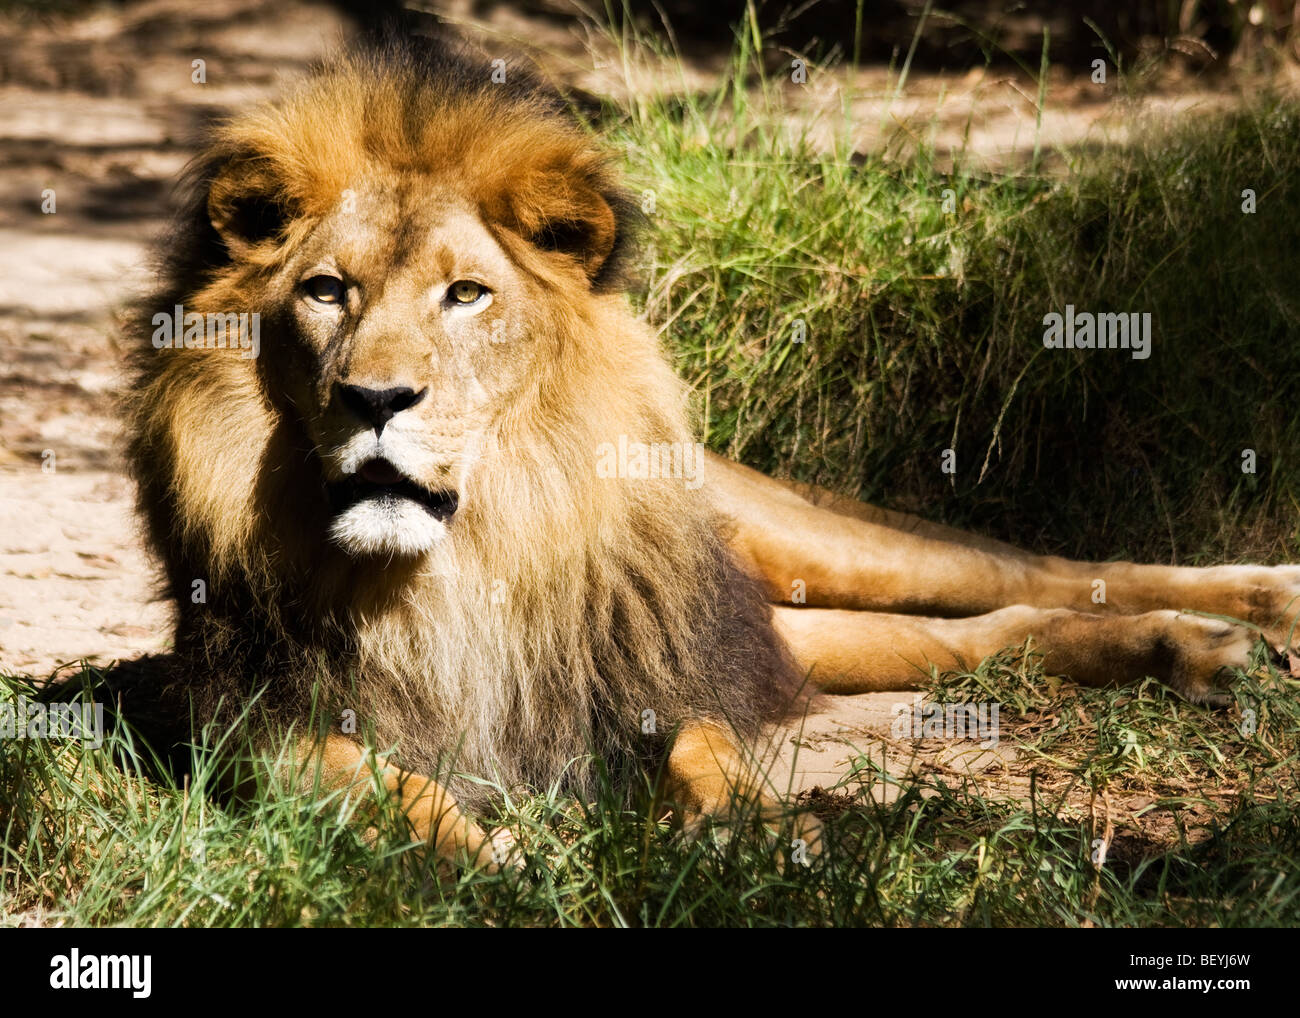 An 'African lion' laying on the ground at the 'Los Angeles Zoo' in 'Los Angeles, California.' Stock Photo